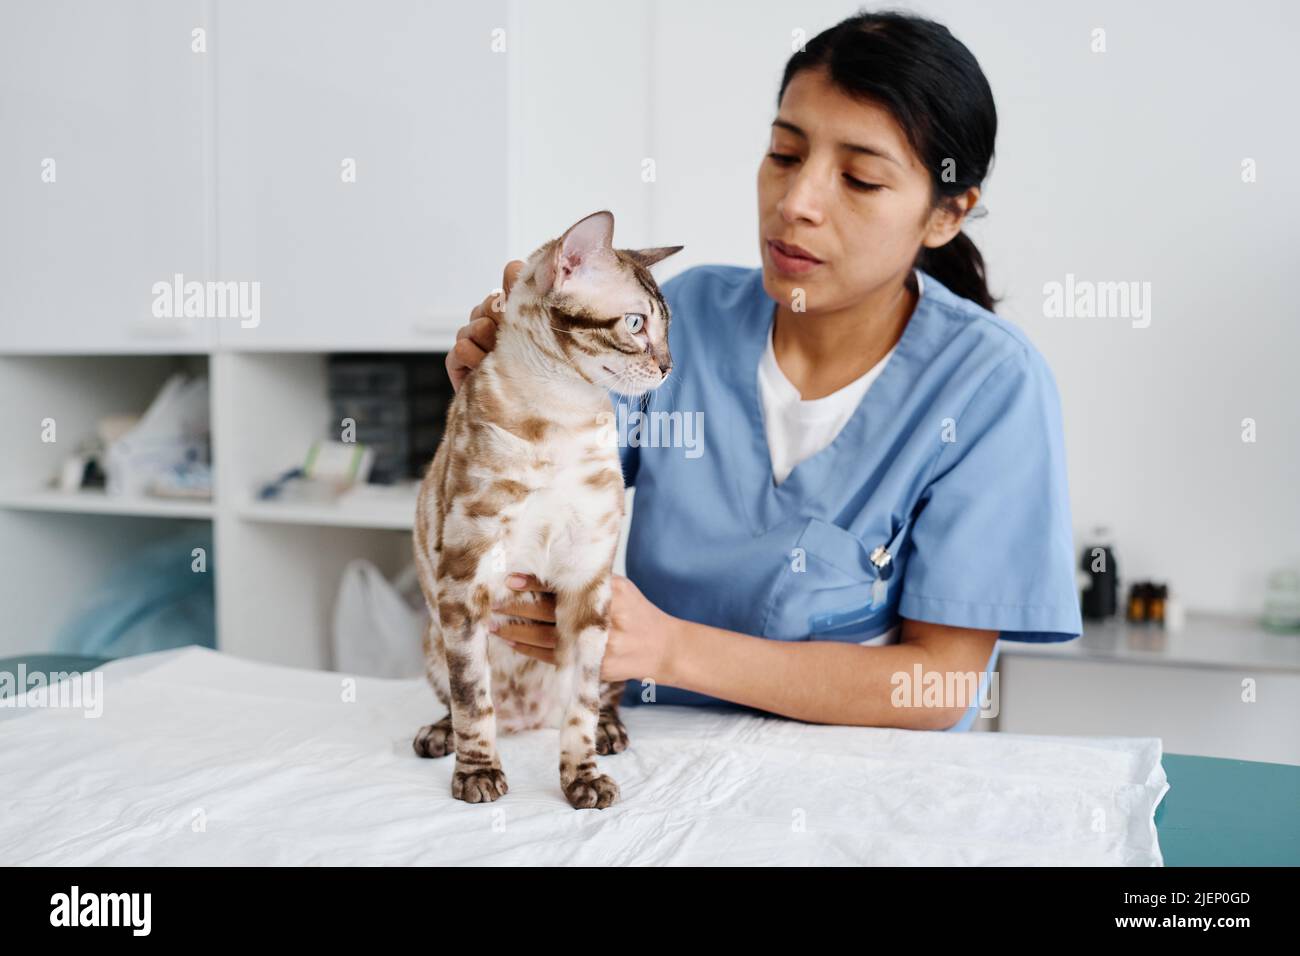 Horizontal medium shot of young adult Hispanic female veterinarian palpating bengal cat during appointment in exam room Stock Photo